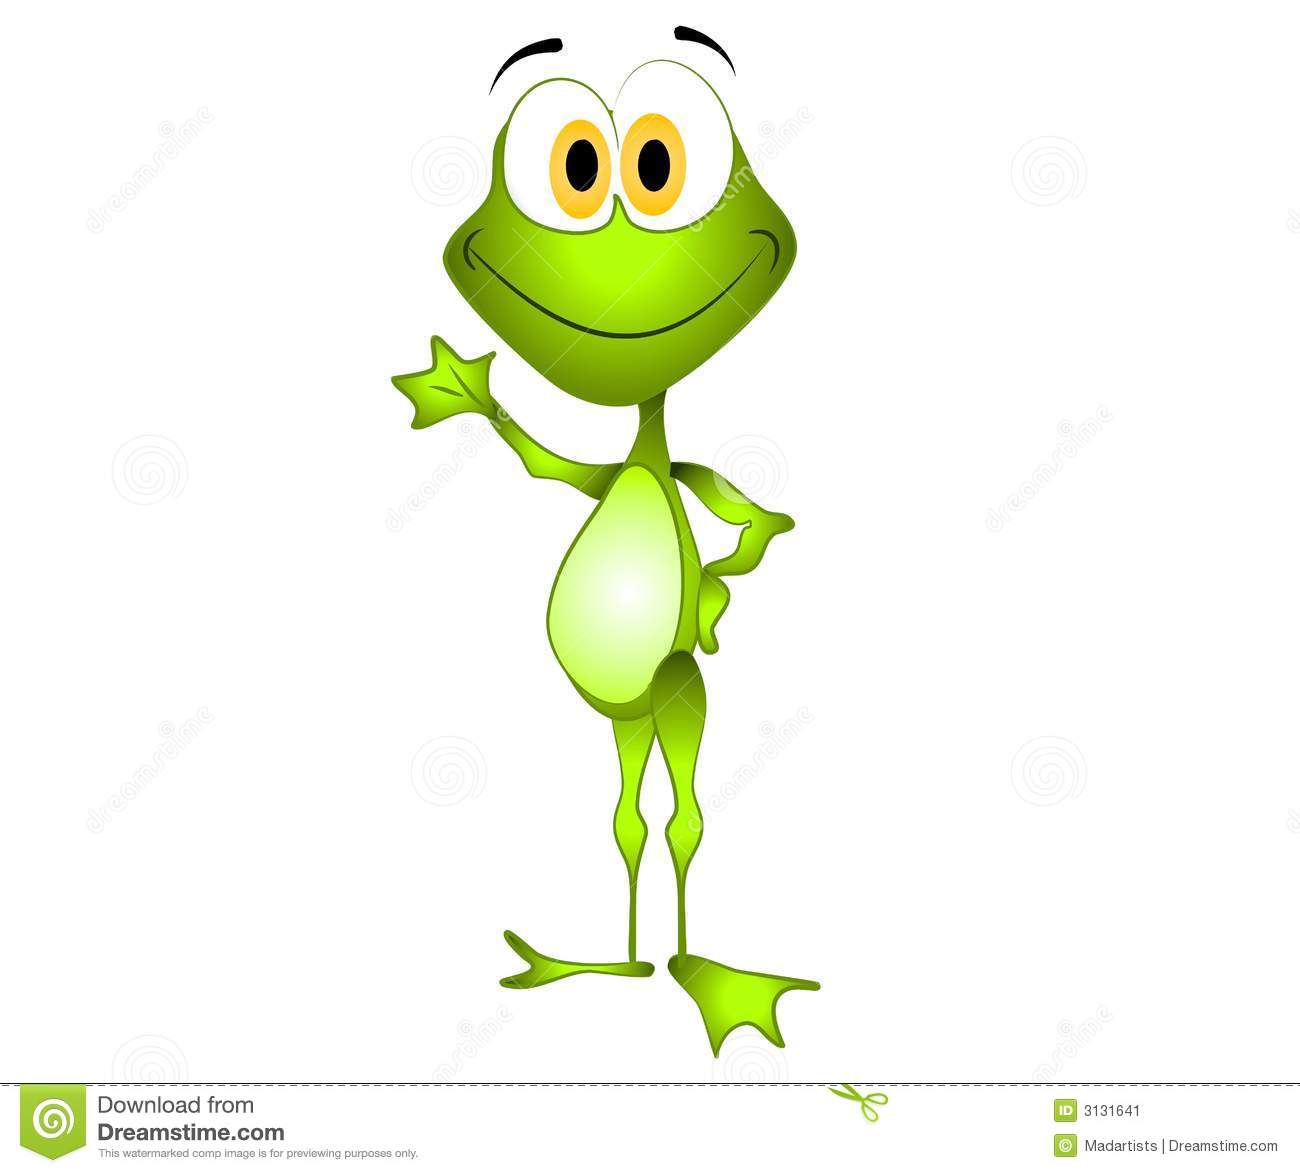 Clip Art Illustration Of A Smiling Green Frog With Green Eyes